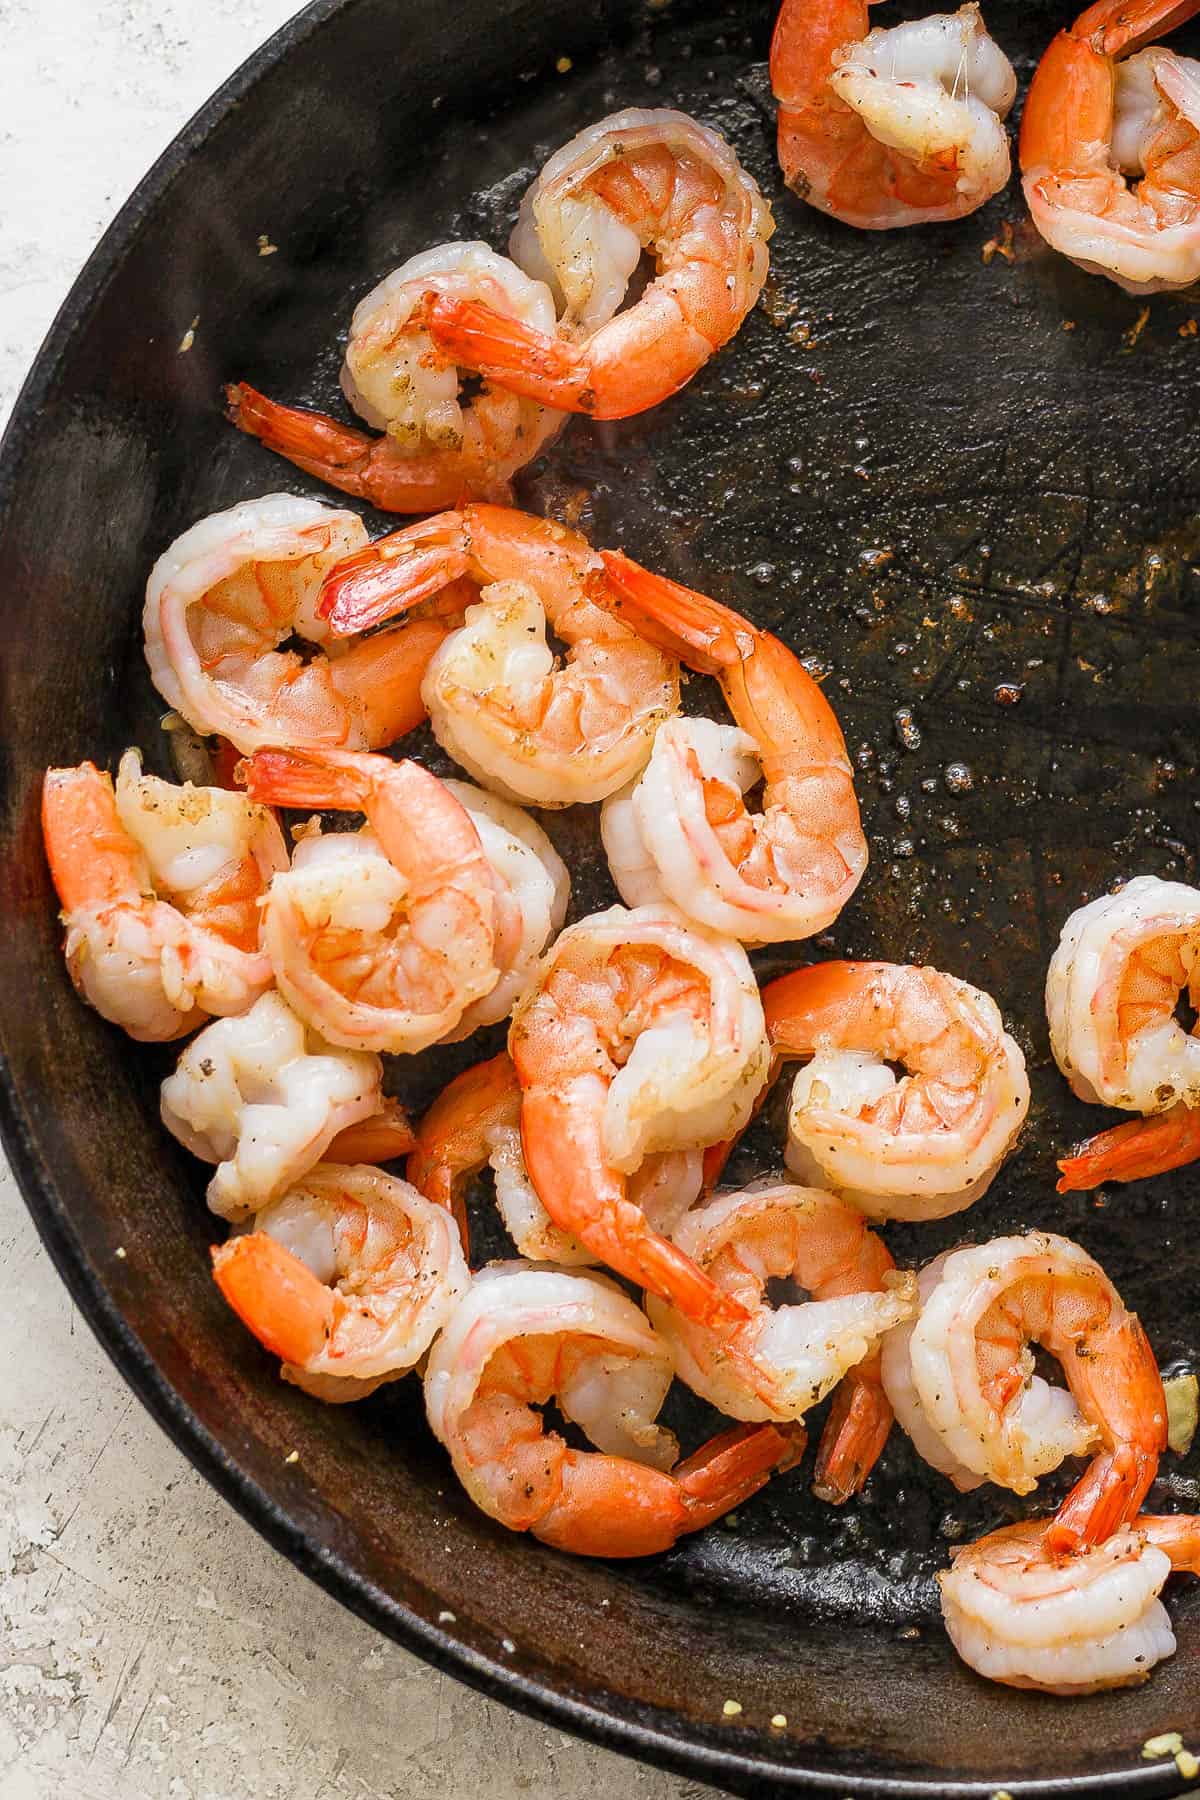 Cooked shrimp in the skillet.